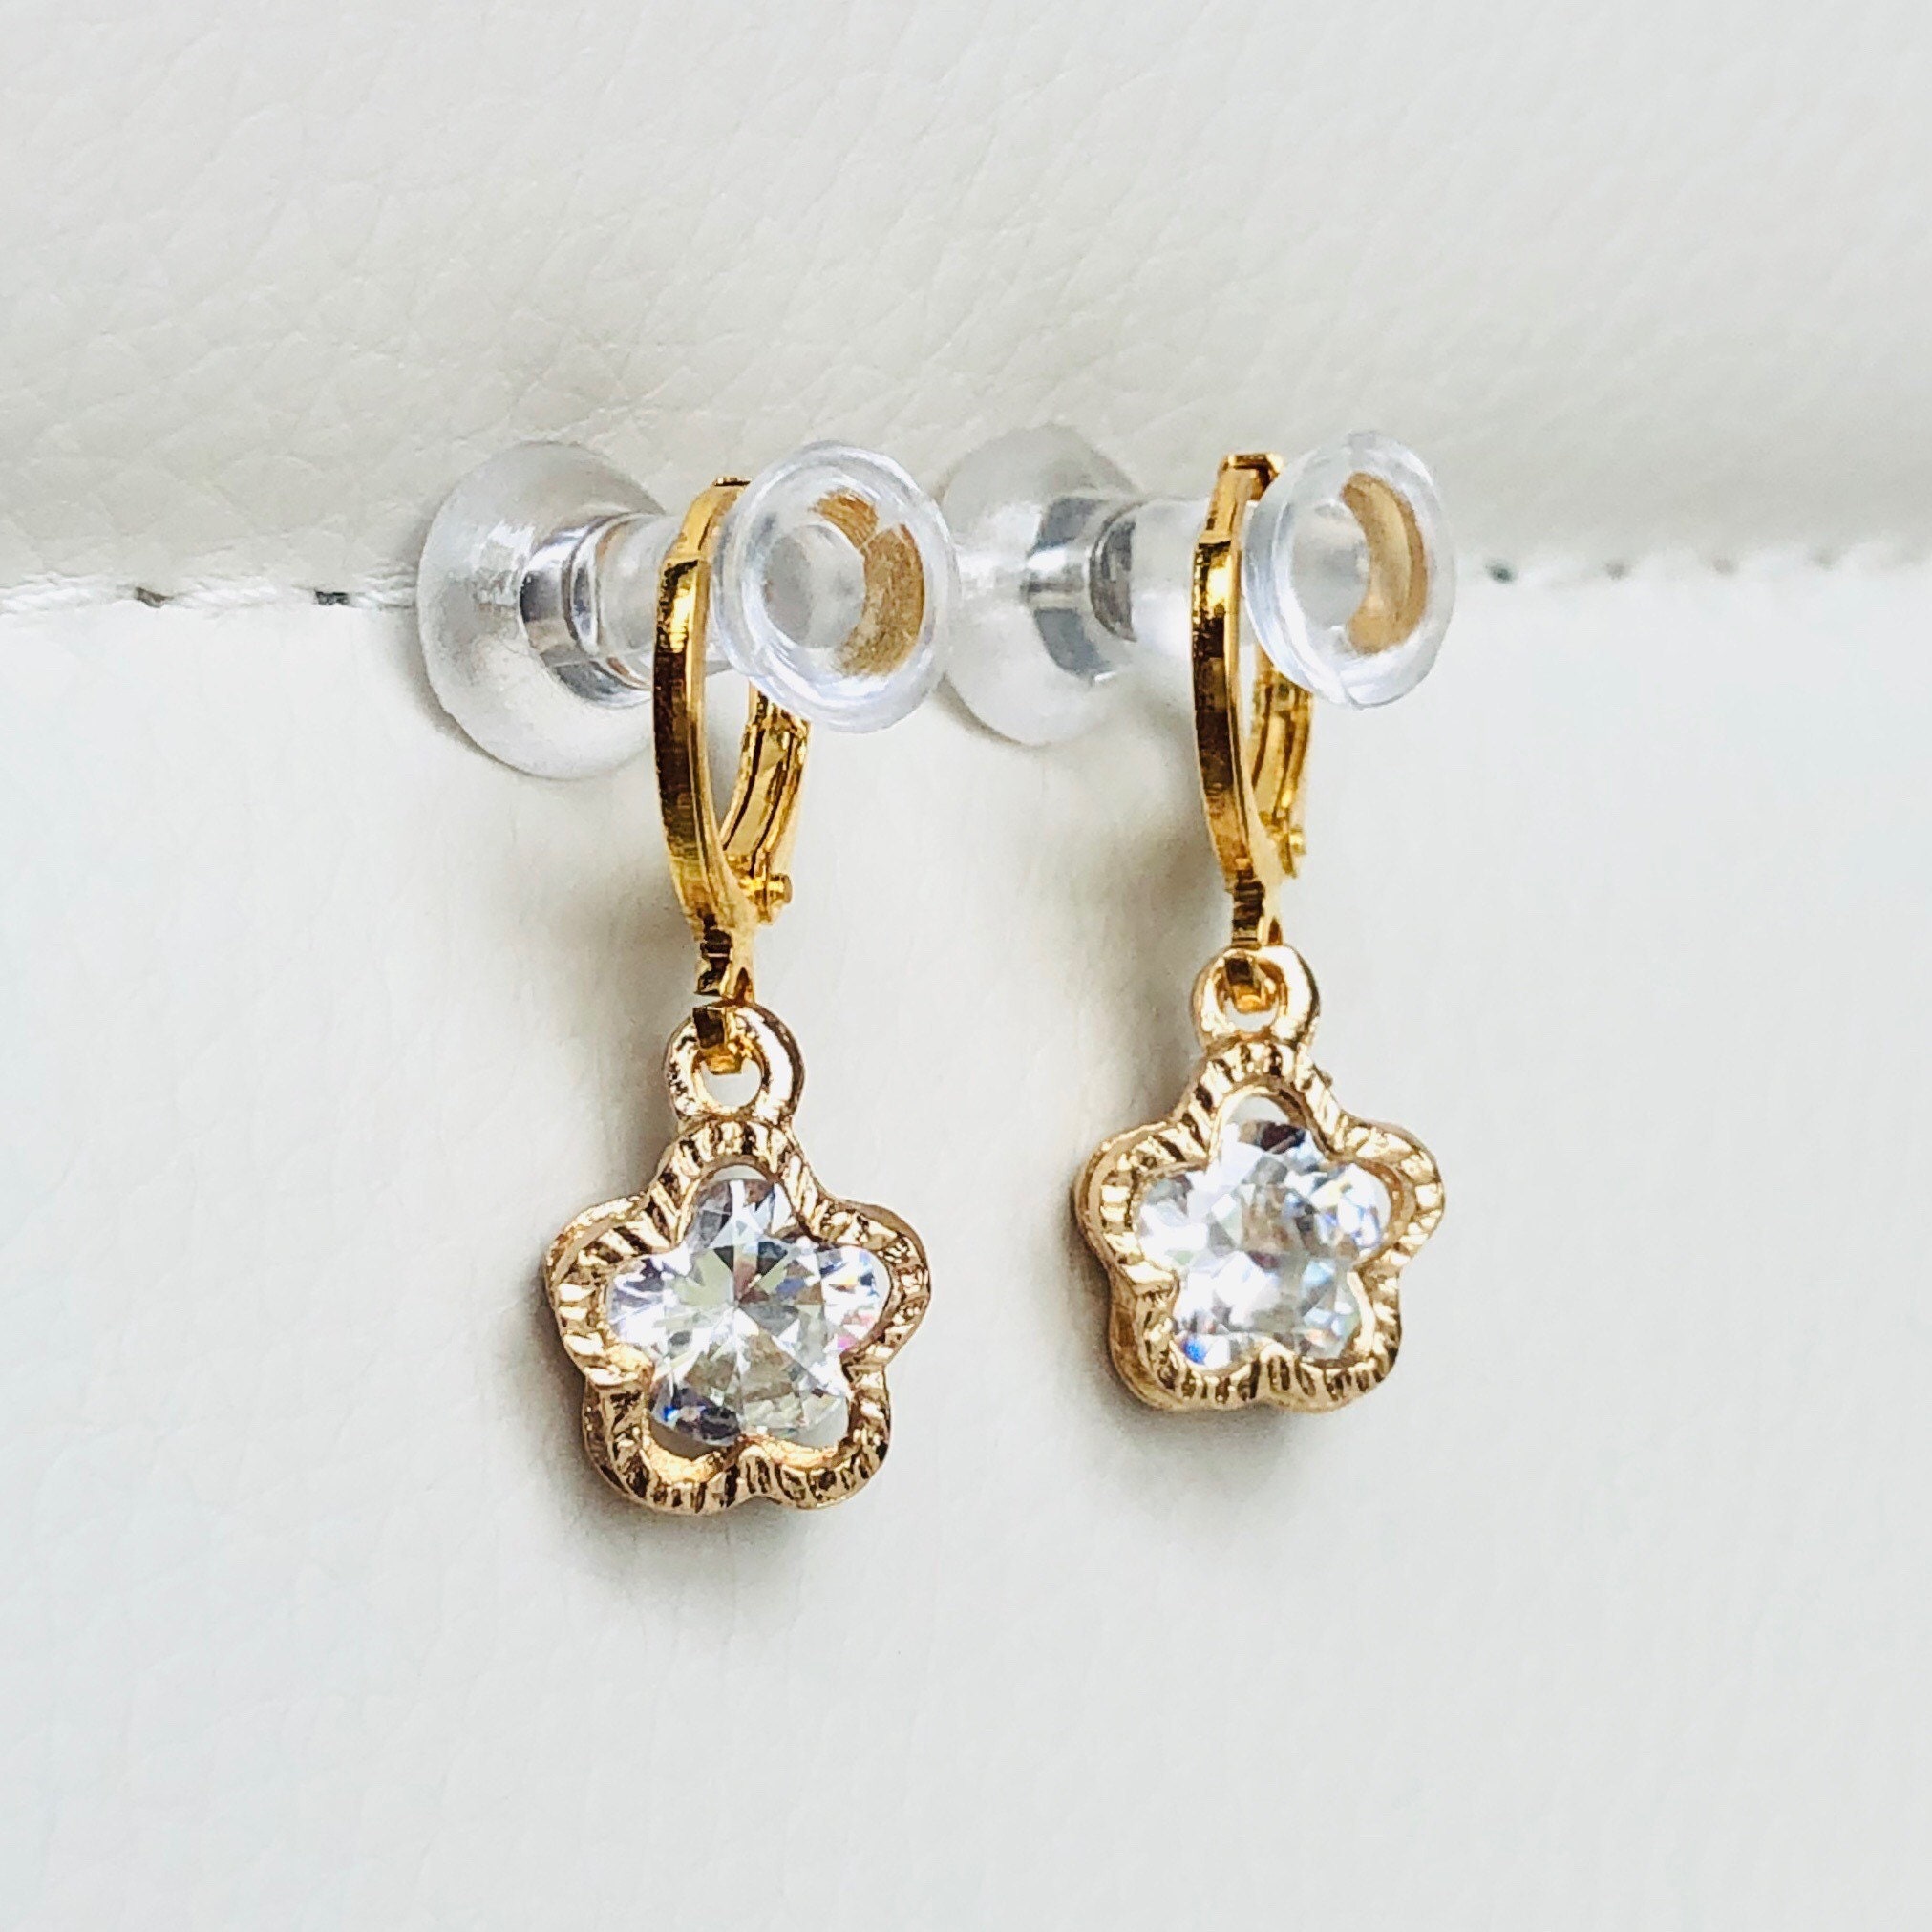 Gold Cubic Zirconia Flower on Leverback Gold Earrings. Cubic